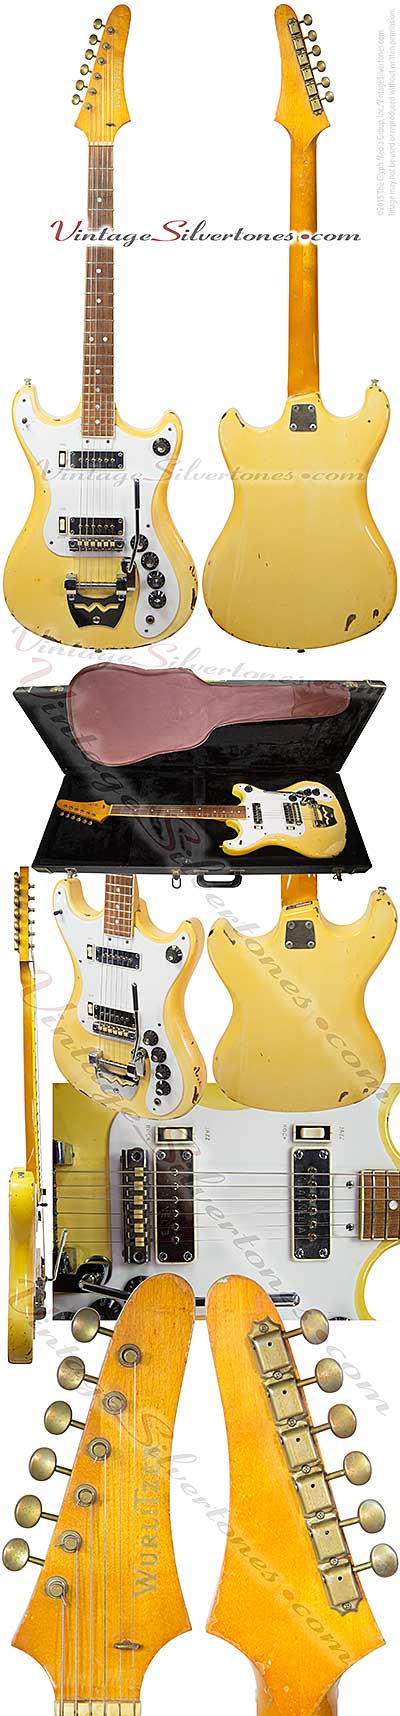 Wurlitzer-Cougar solid body, 2 pickup, stereo, yellow finish, double cutaway, electric guitar